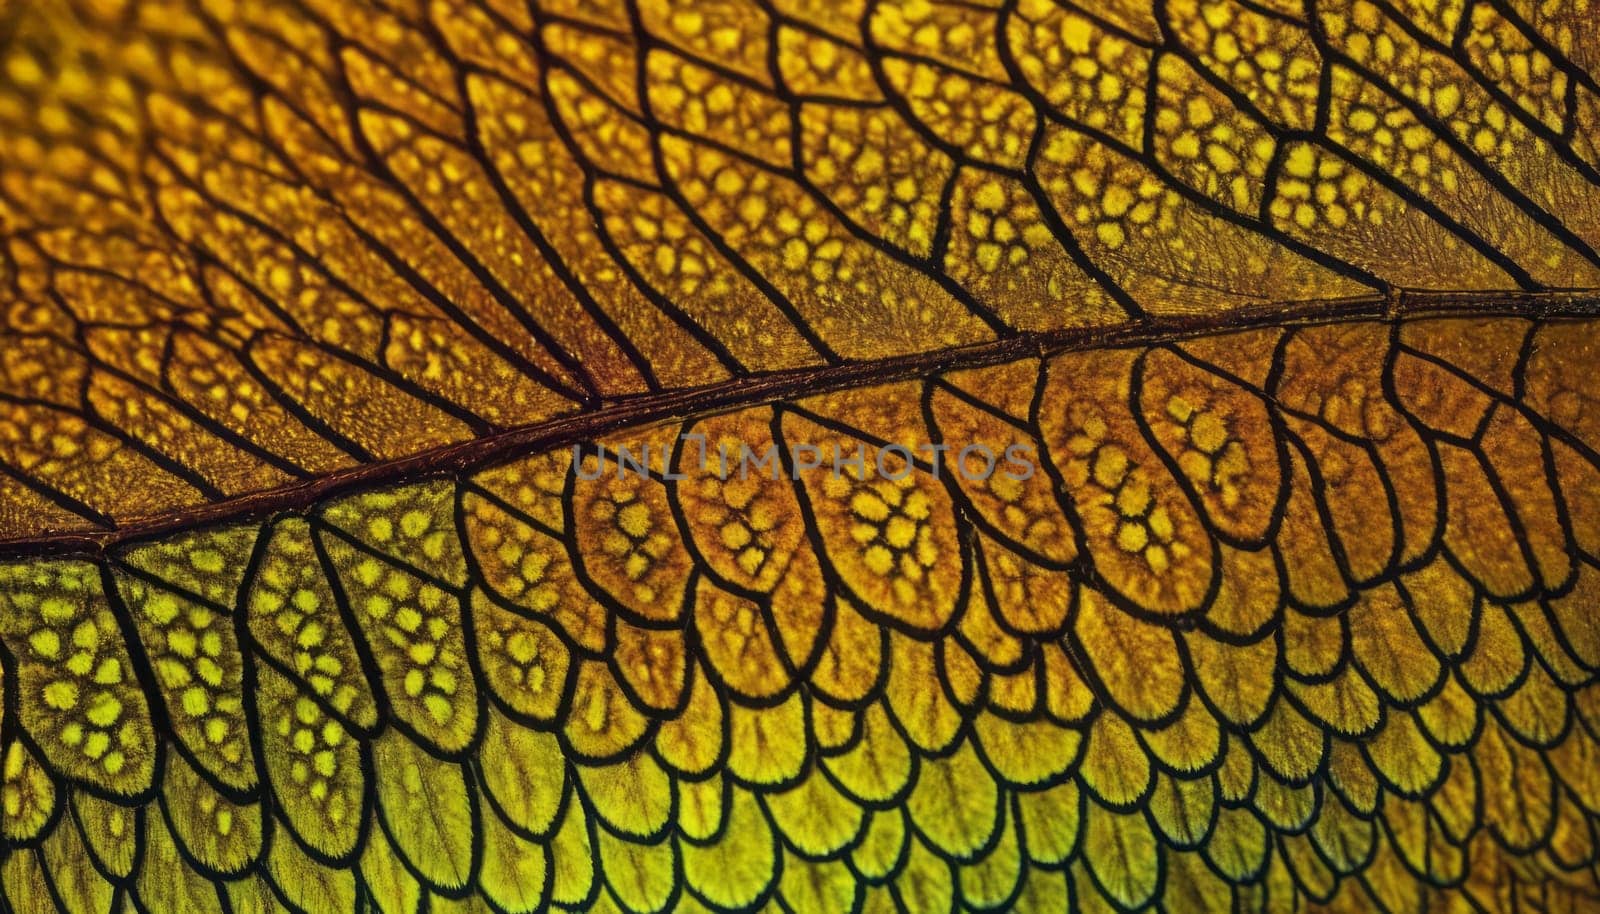 A close-up image of a butterfly wing, showcasing its intricate vein structure and cell patterns